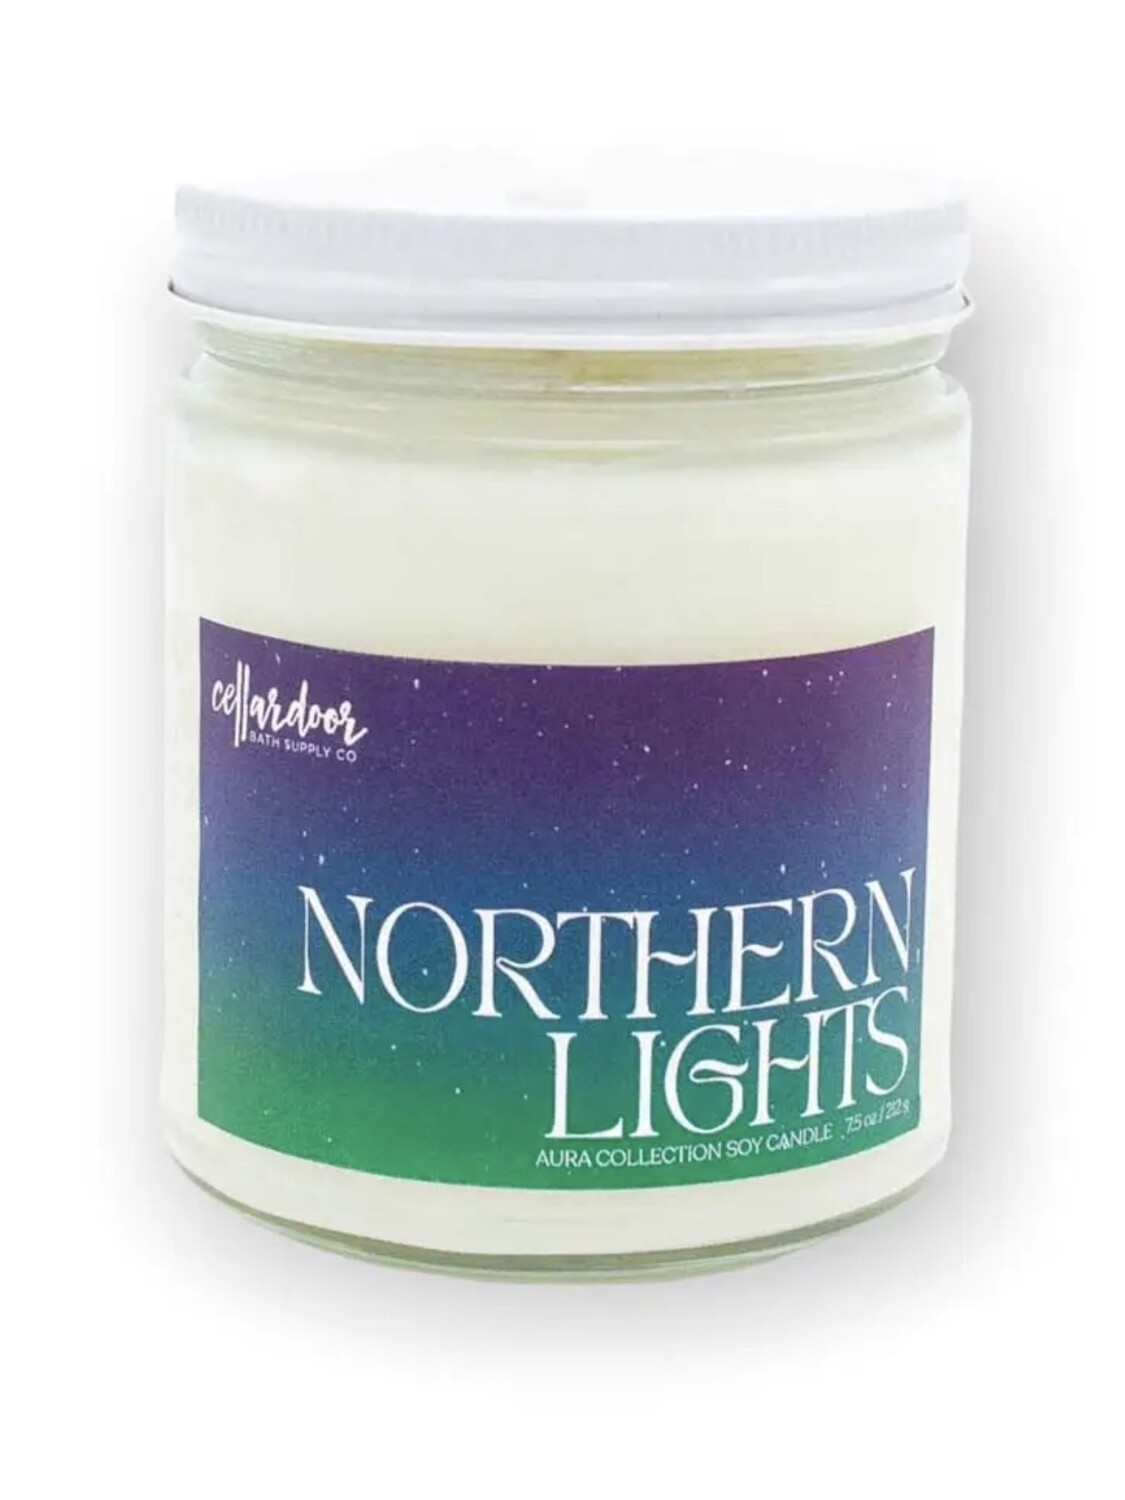 Northern Lights 7.5 oz Soy Candle